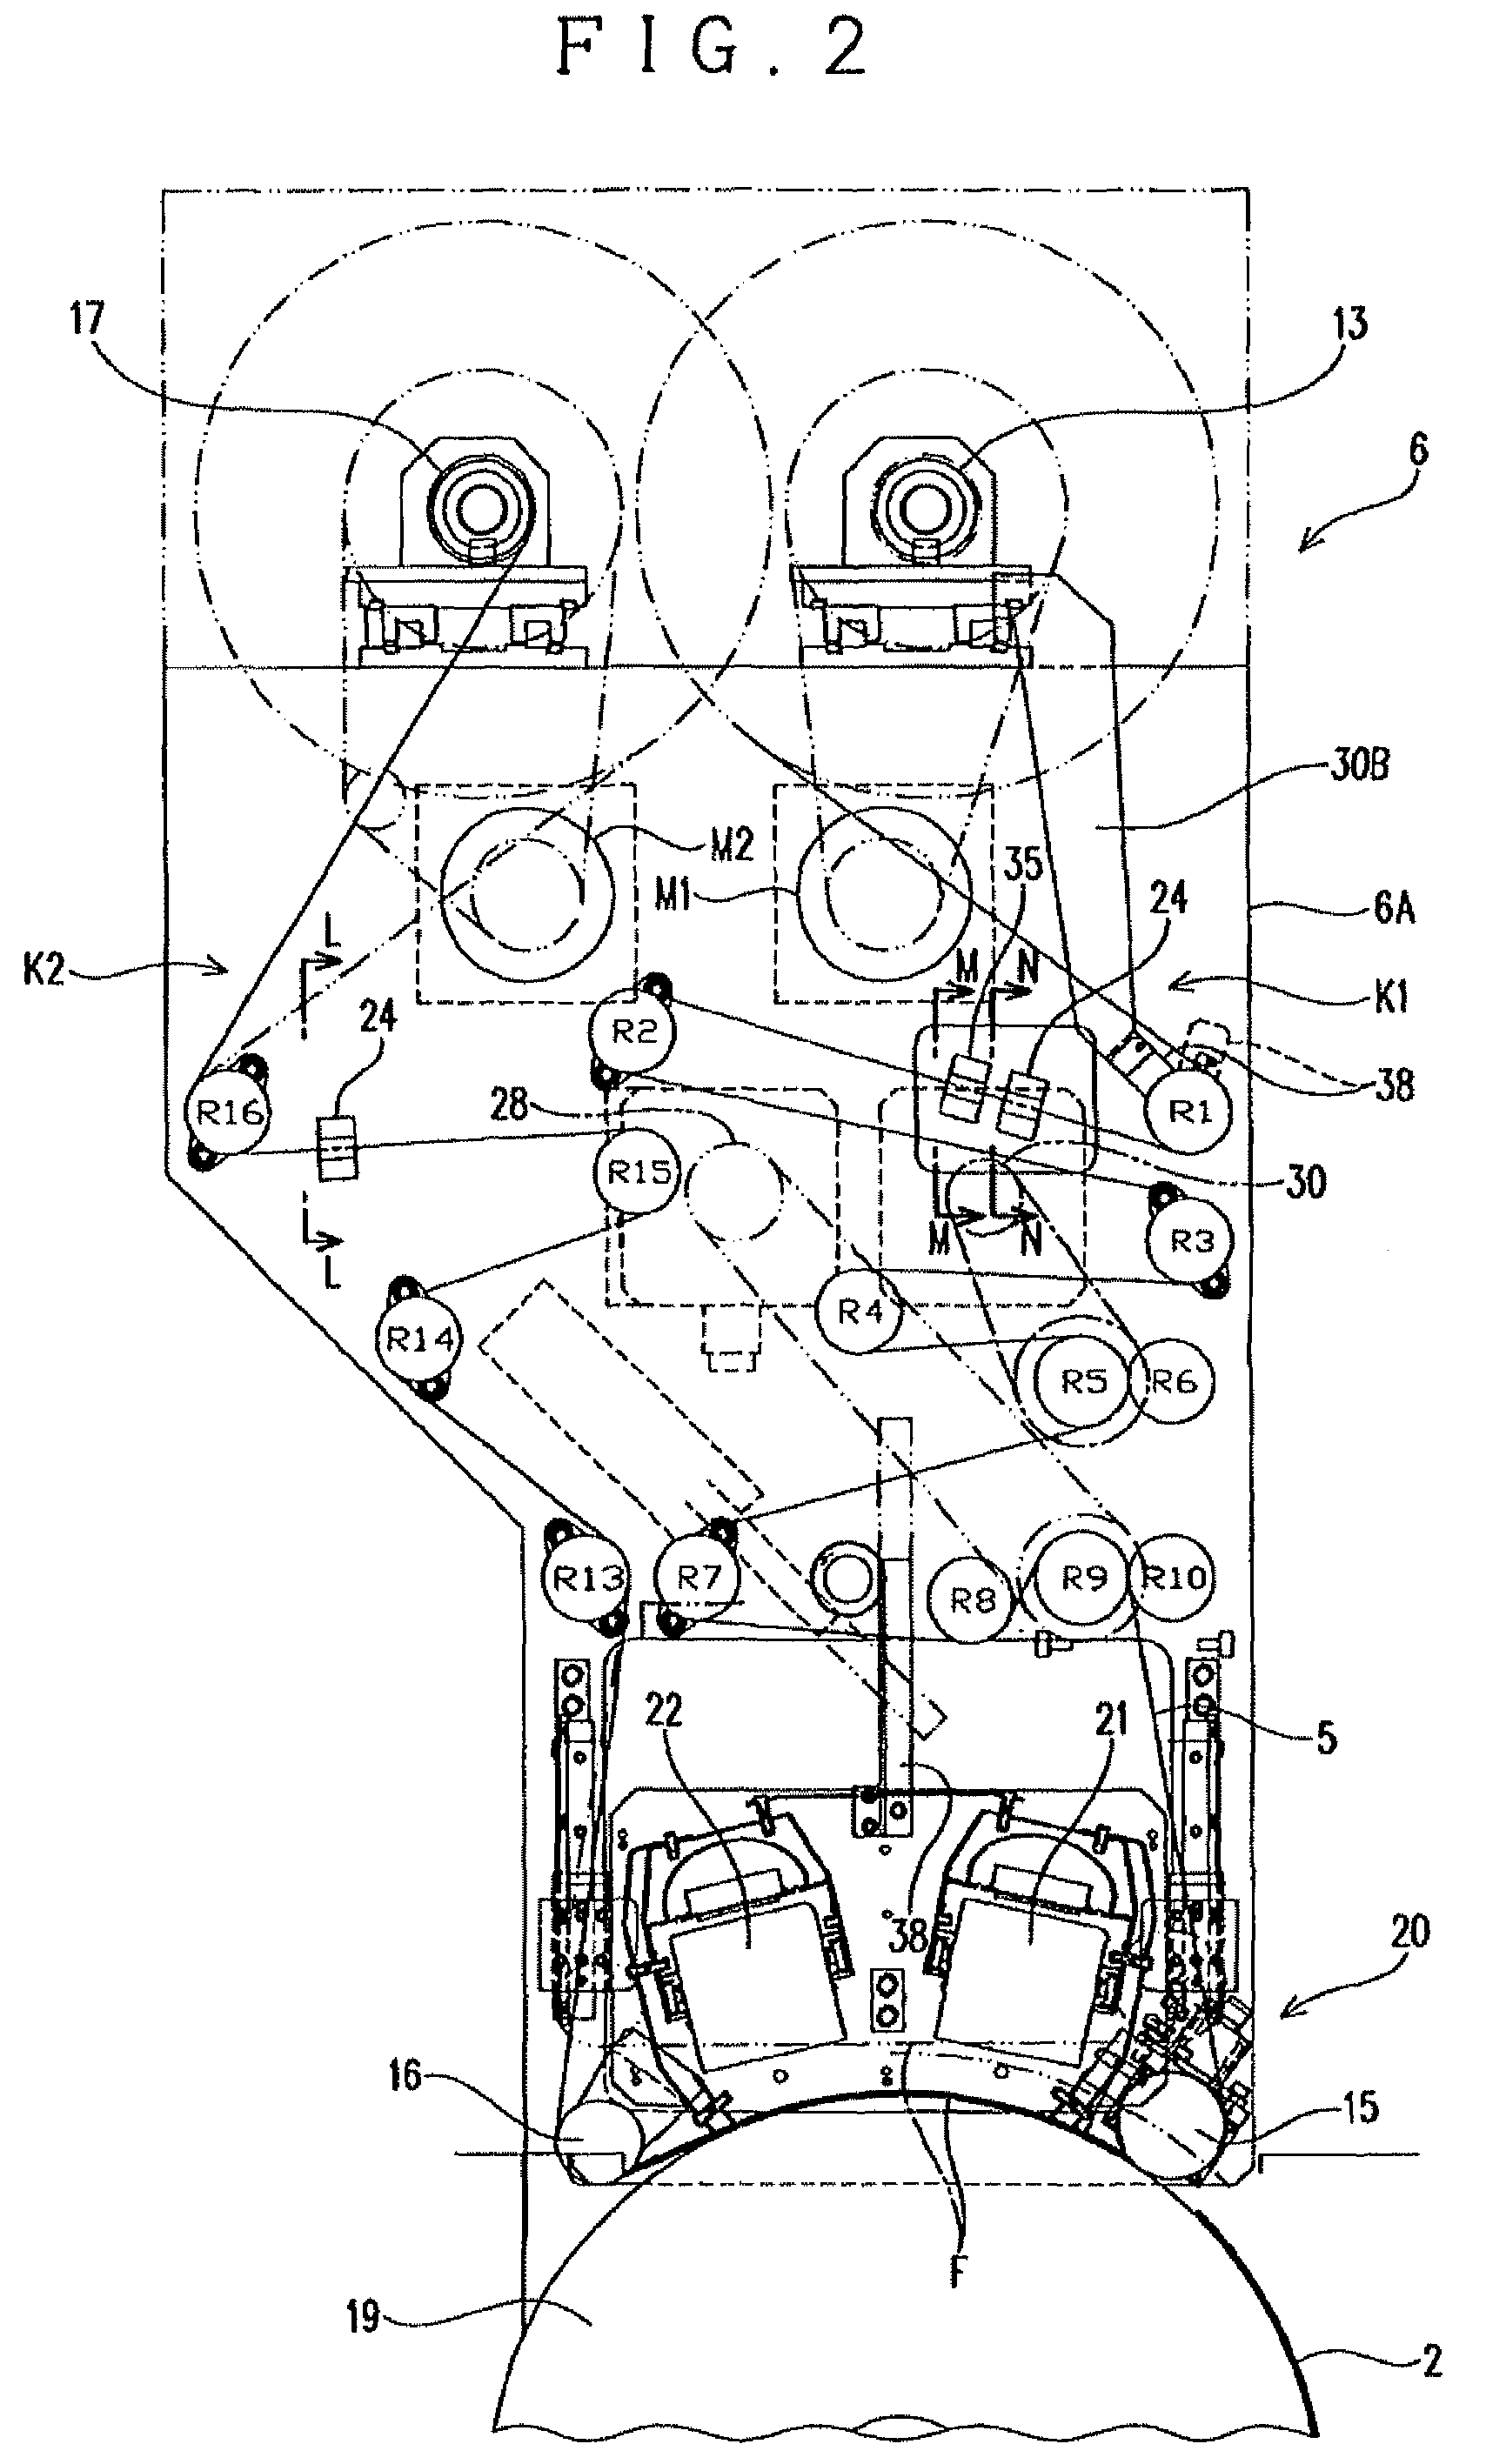 Method of winding up transfer film and device for performing transfer printing on printed sheets of paper